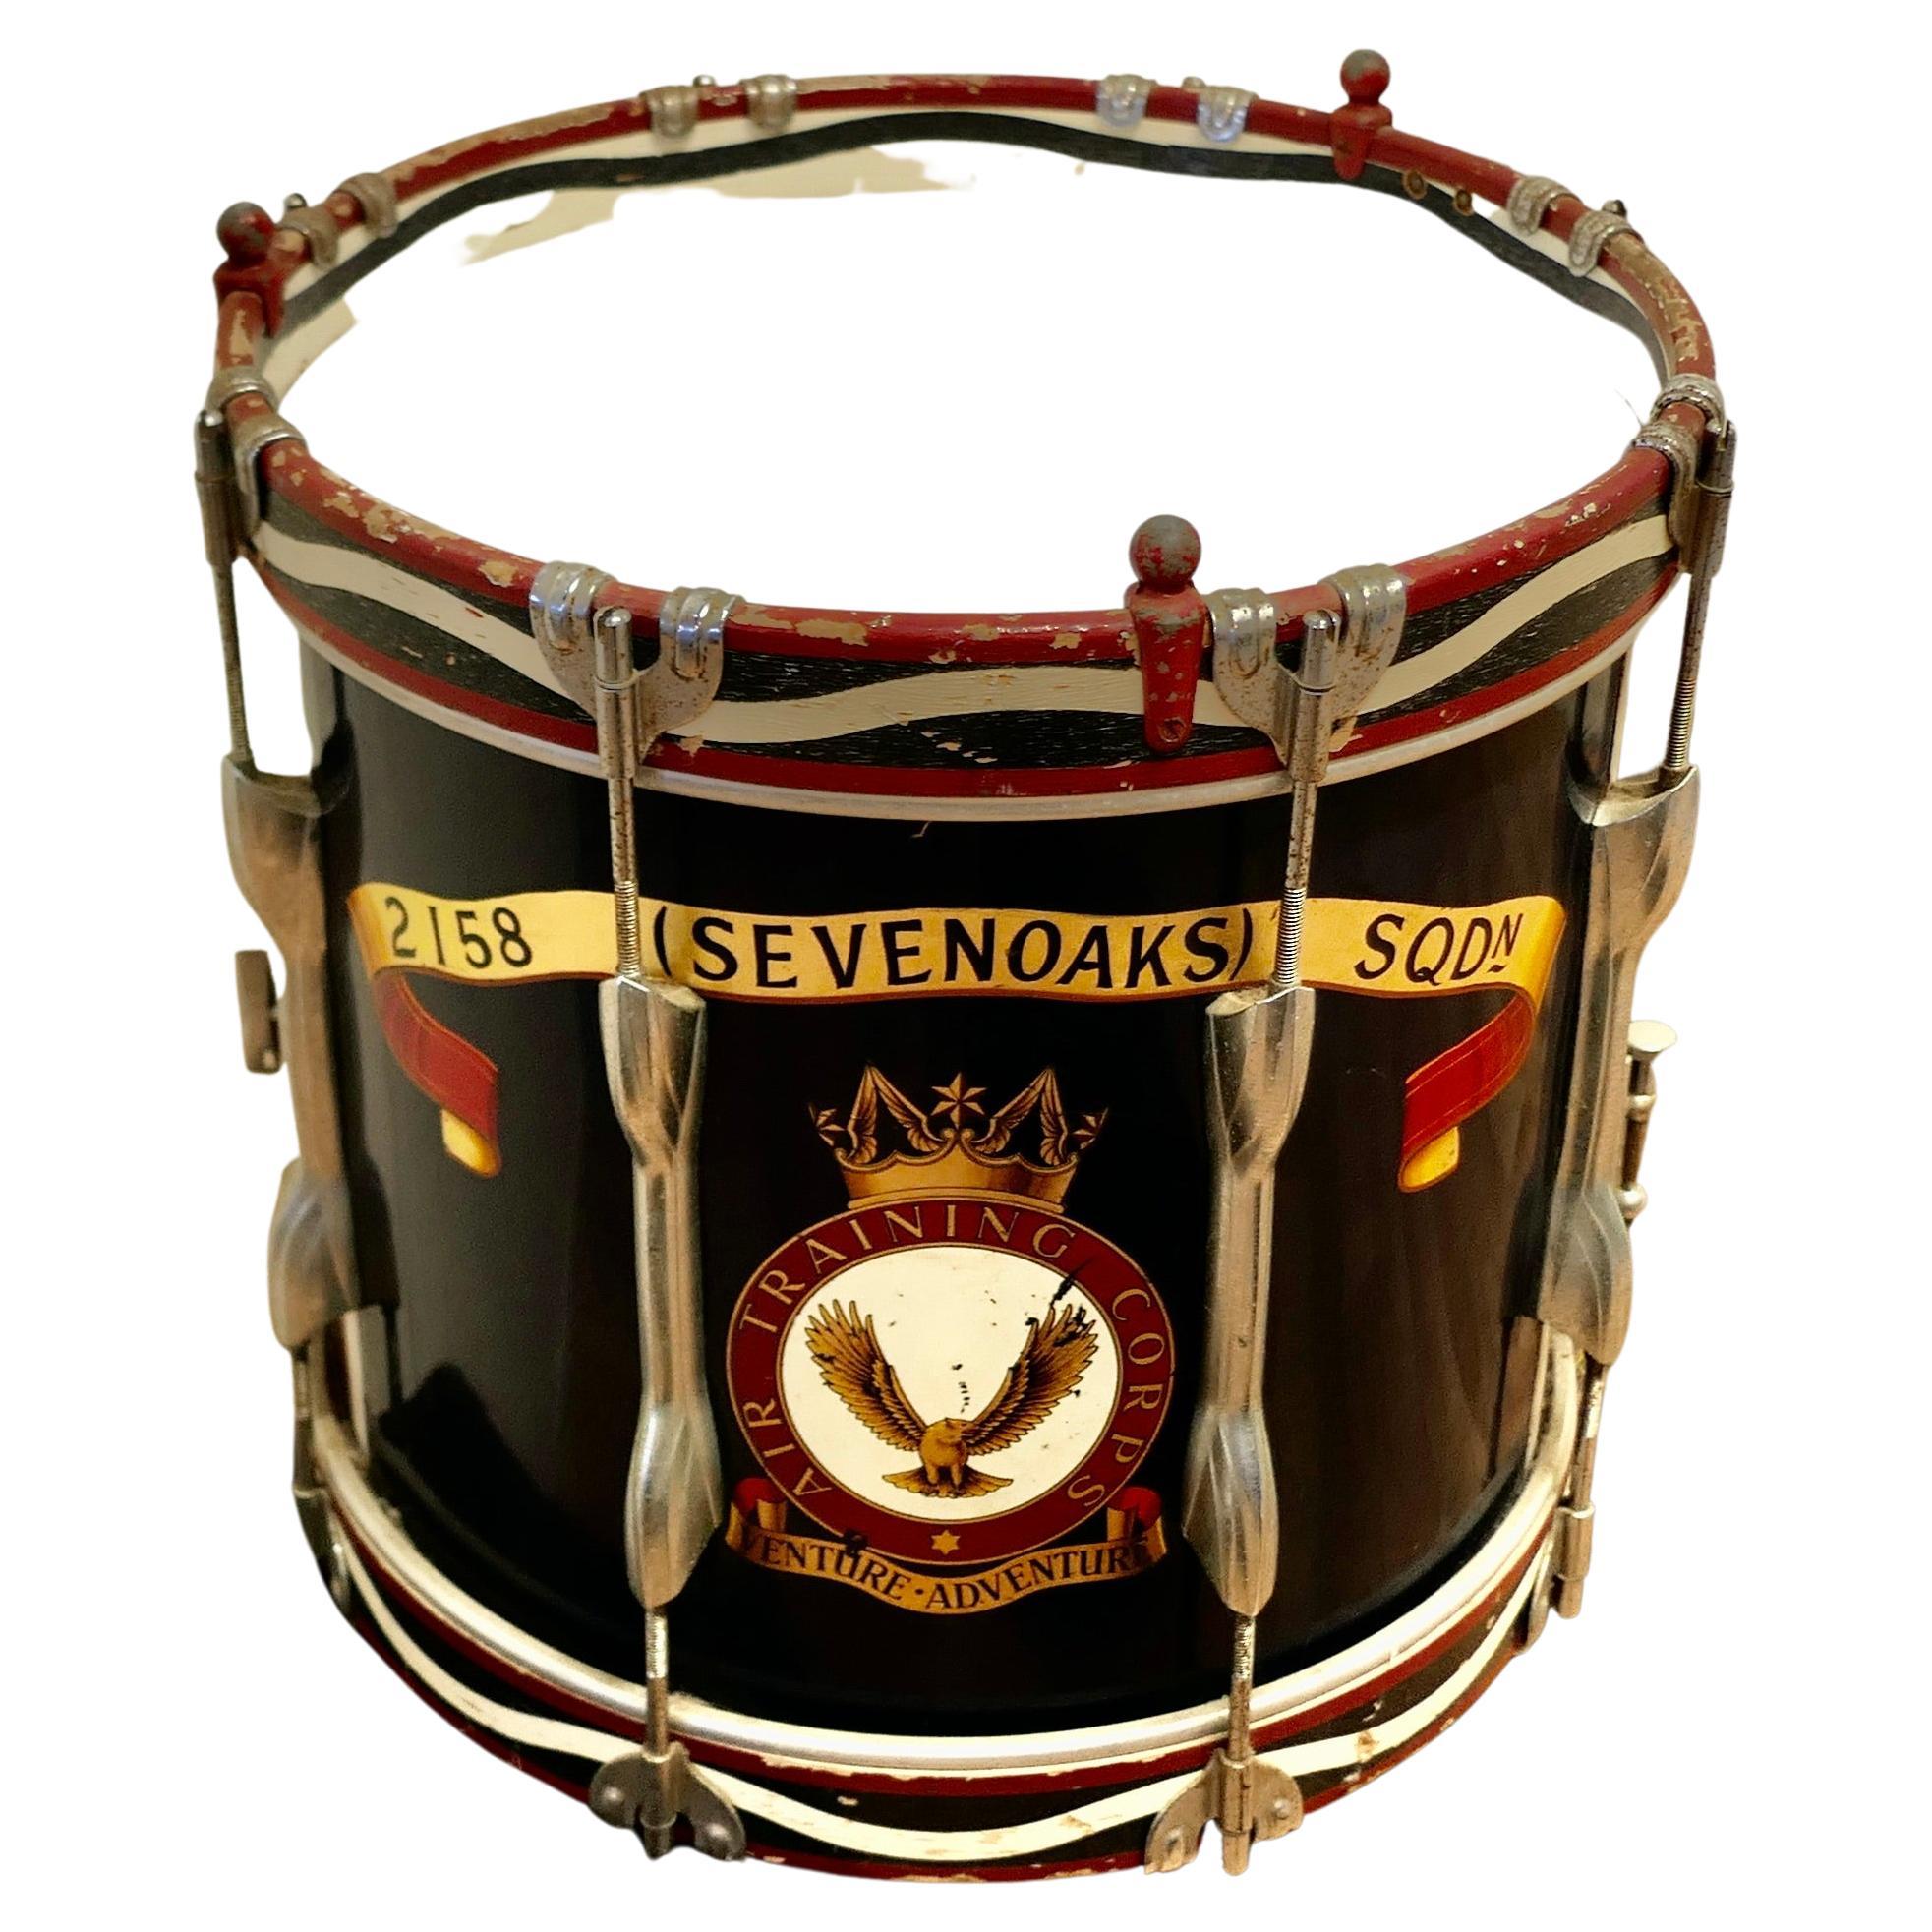 Handsome Military Snare Drum from Sevenoaks Air Training Corps